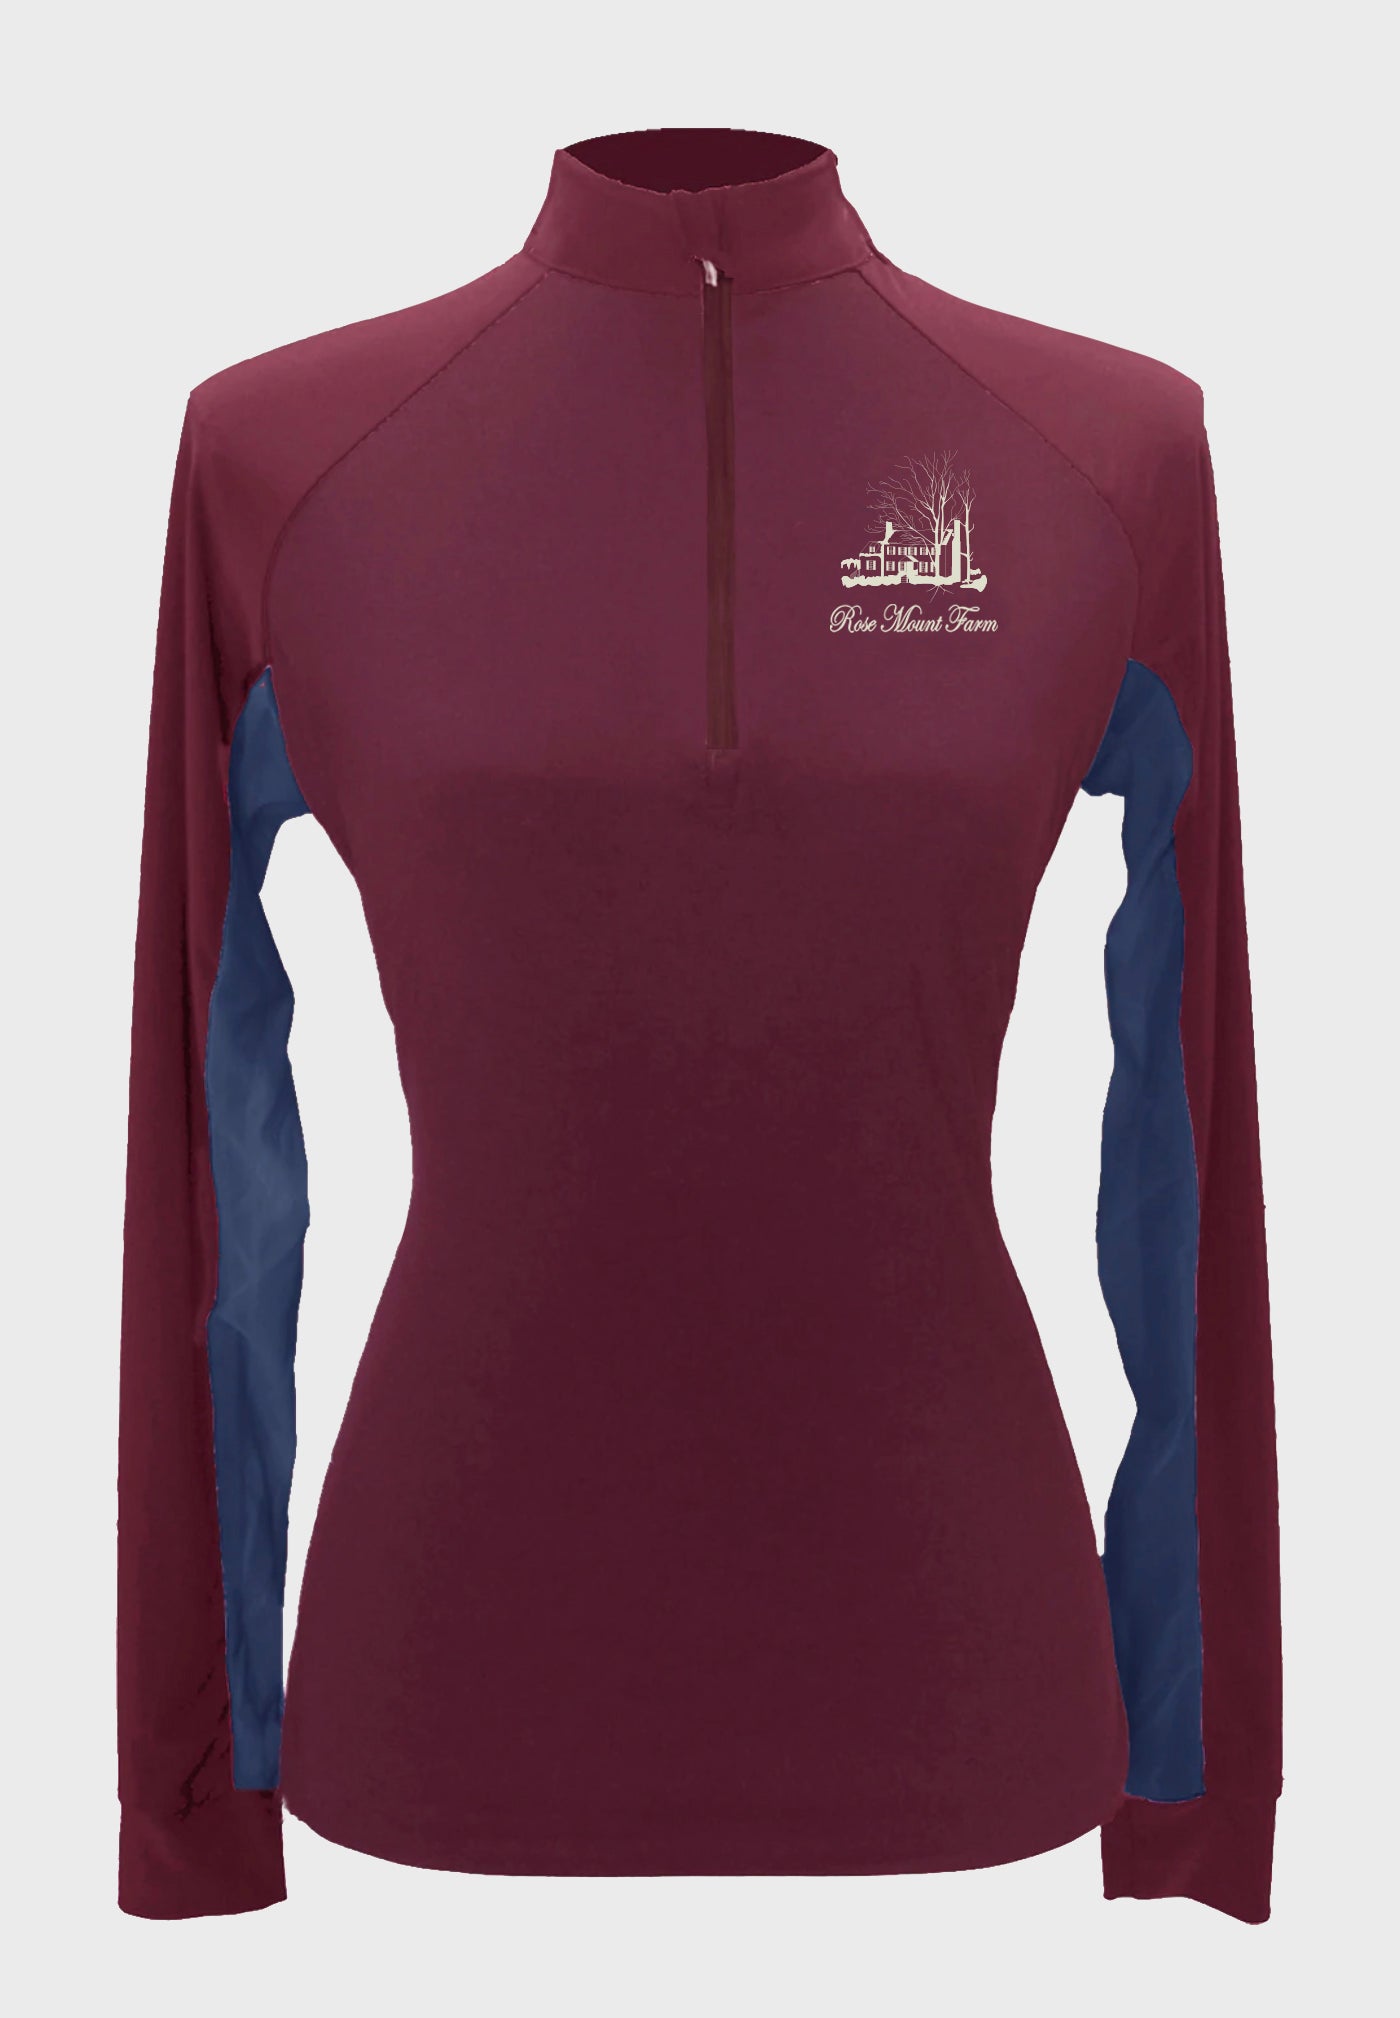 Rose Mount farm Maroon Sun Shirt with Maroon zipper, Vent color Choice  -    Adult + Youth sizes